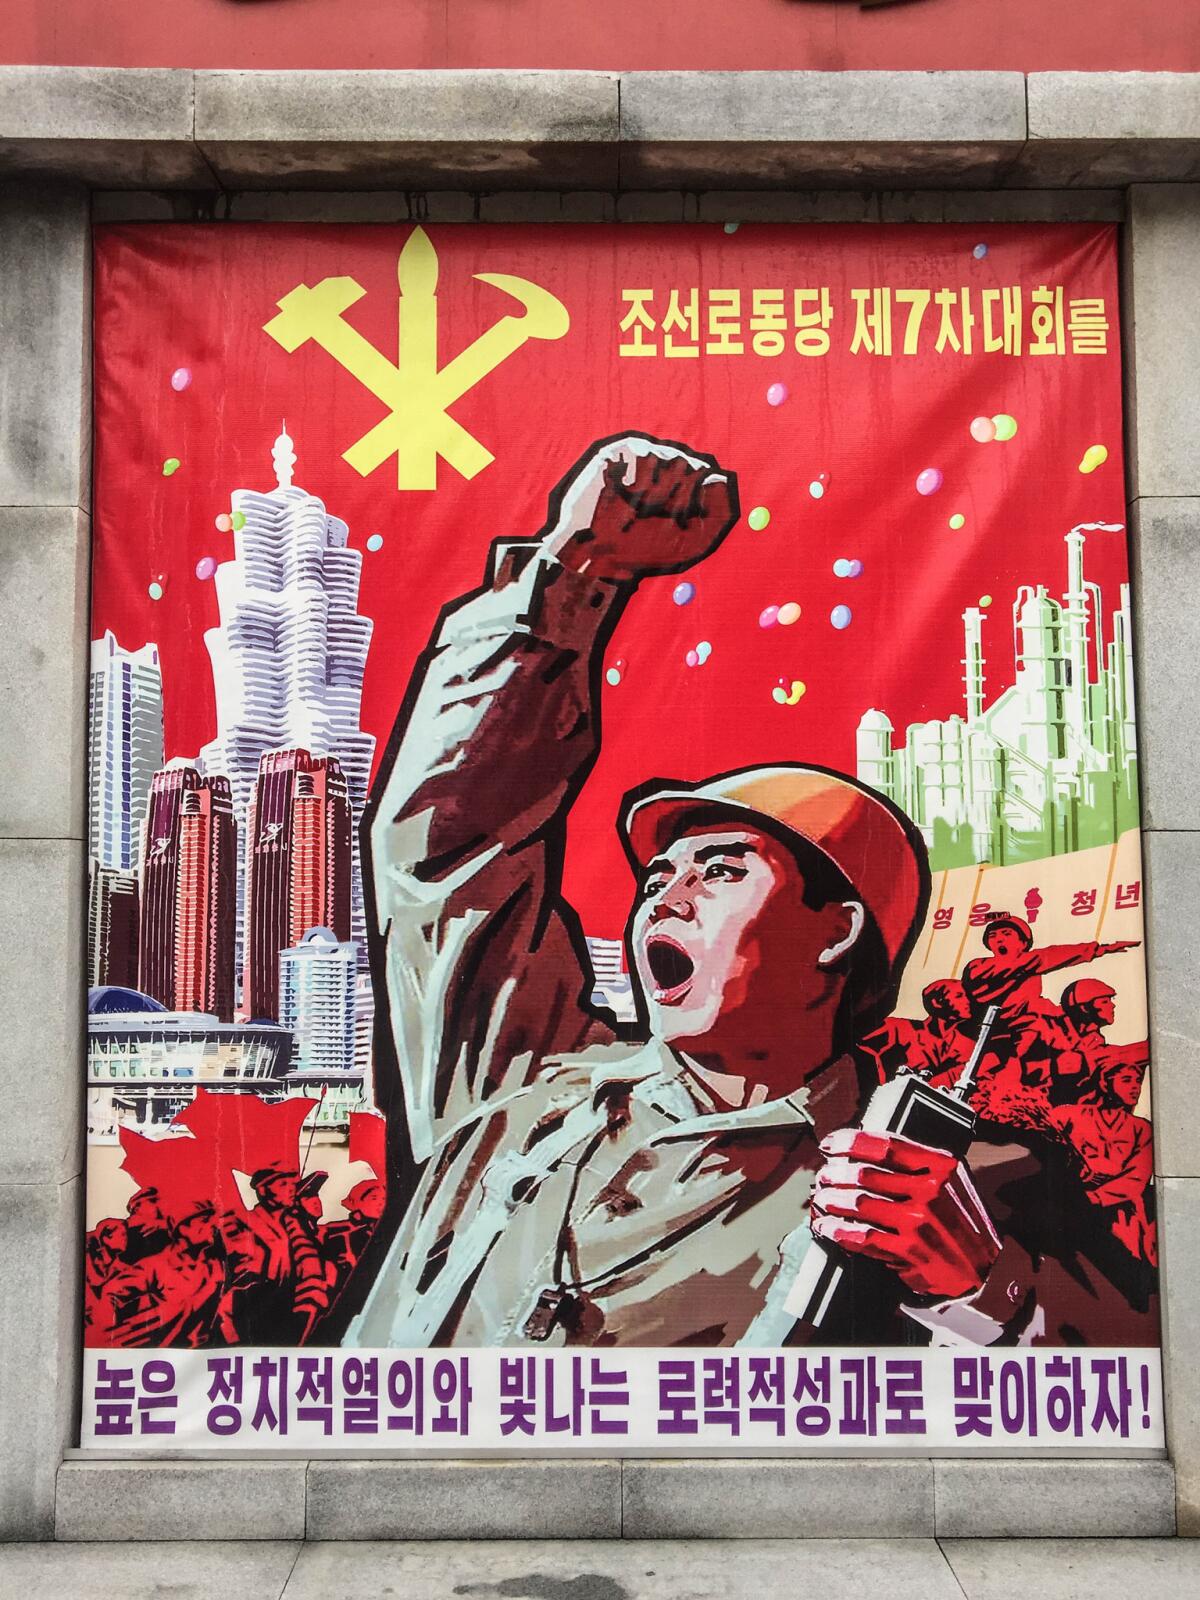 A piece of propaganda art outside the factory. The poster exhorts workers to work hard ahead of the party congress. Depicted in the background are skyscrapers from the new “Future Science Street” in Pyongyang, a residential district for scientists and professors that was built at the behest of Kim Jong Un. It reads: "Let us greet the 7th Workers Party Congress with a high sense of political enthusiasm and brilliant labor achievements." (Julie Makinen / Los Angeles Times)